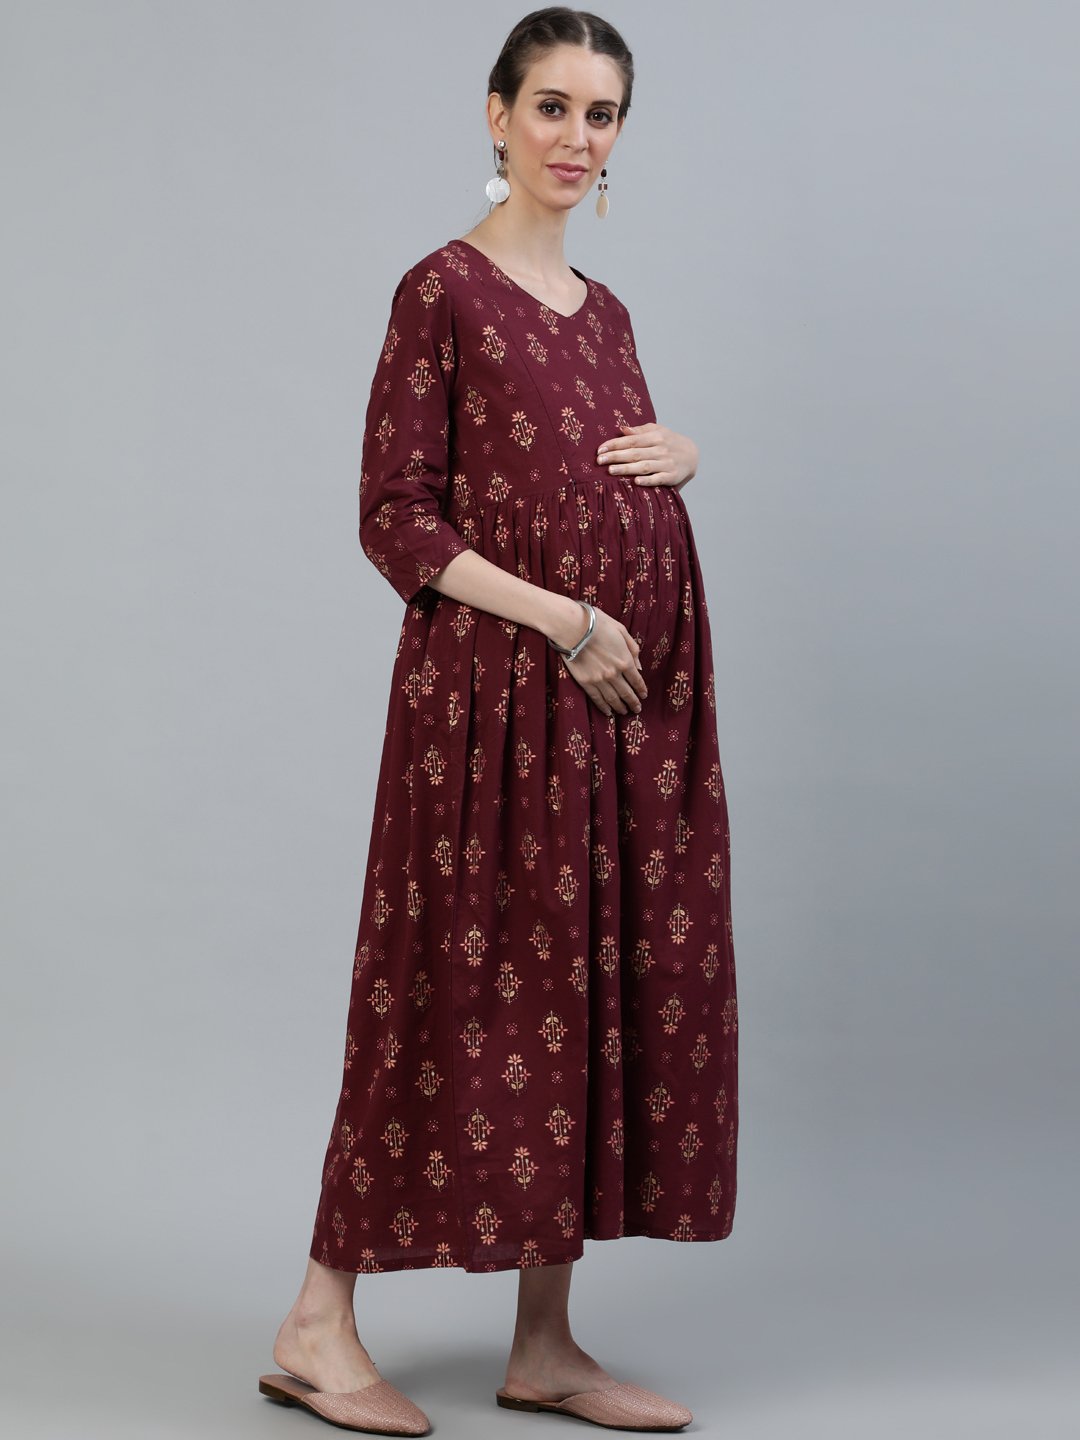 Women's Maroon Printed Flared Maternity Dress With Three Quarters Sleeves & Belt - Nayo Clothing